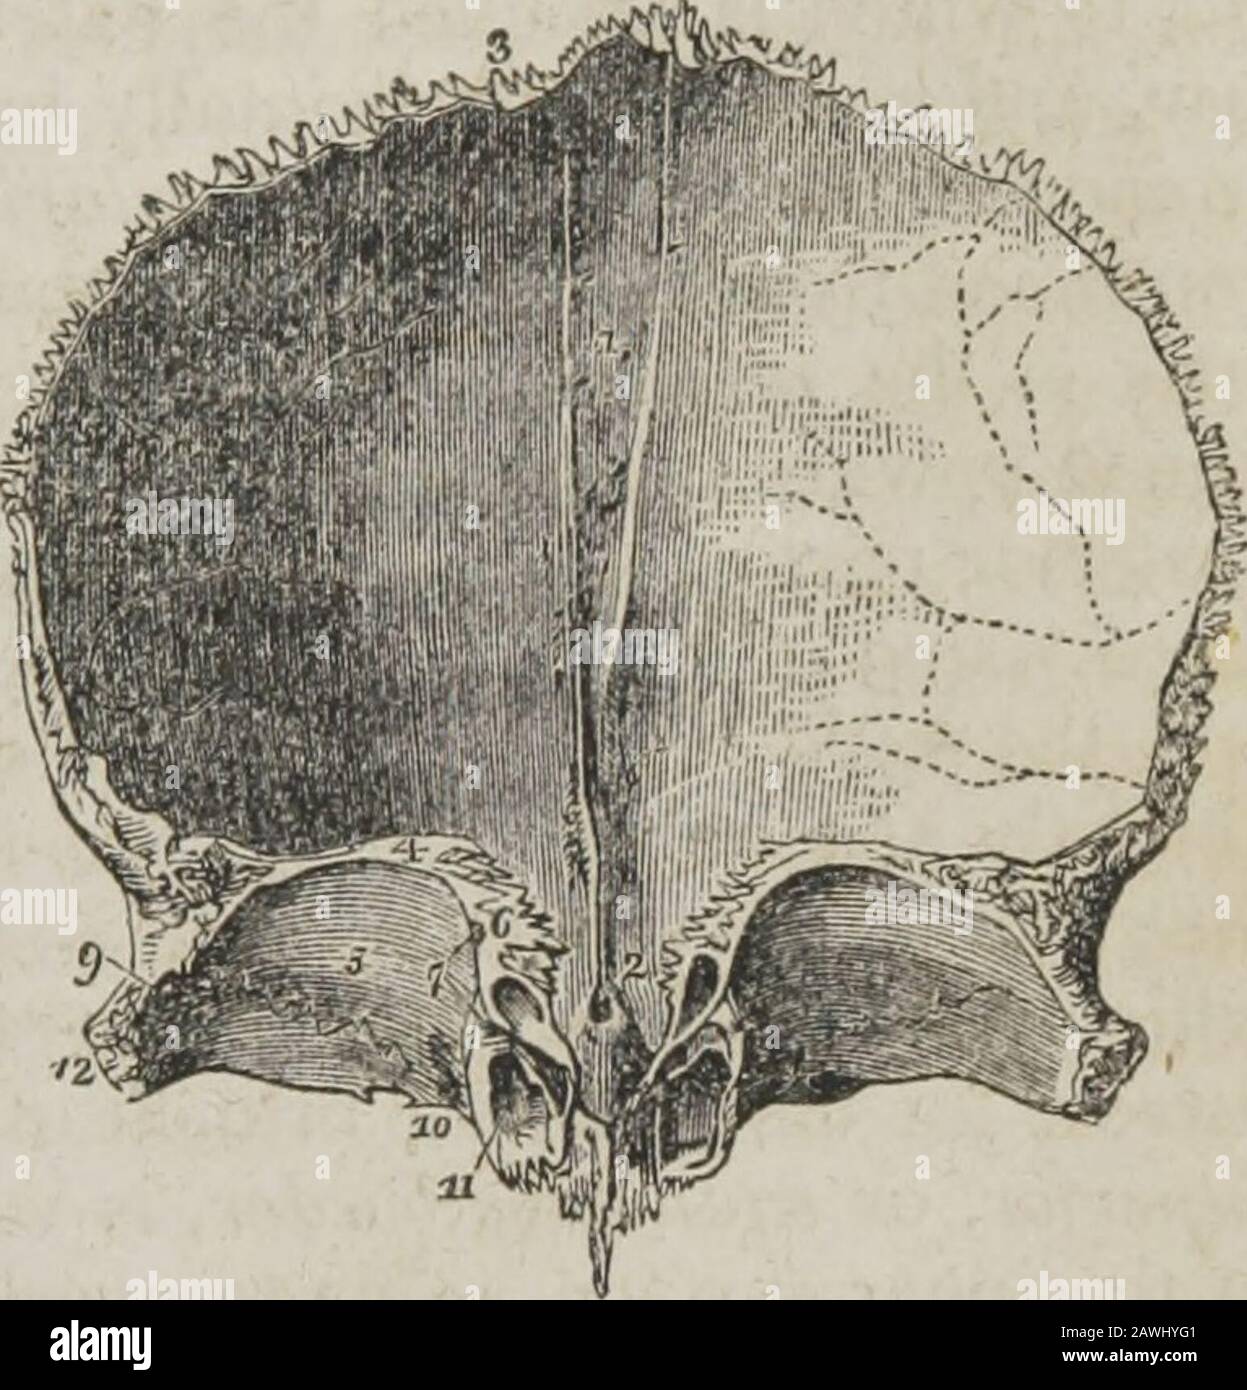 A system of human anatomy, general and special . in such a manner as toshow the orbito-nasal portion. 1. The grooved ridge for the lodgment of the superiorlongitudinal sinus and attachment of the falx. 2. The foramen caecum. 3. The superioror coronal border of the bone; the figure is situated near that part which is bevelled at theexpense of the internal table. 4. The inferior border of the bone. 5. The orbital plate ofthe left side. 6. The cellular border of the ethmoidal fissure. The foramen caecum (2)is seen through the ethmoidal fissure. 7. The anterior and posterior ethmoidal foramina;the Stock Photo